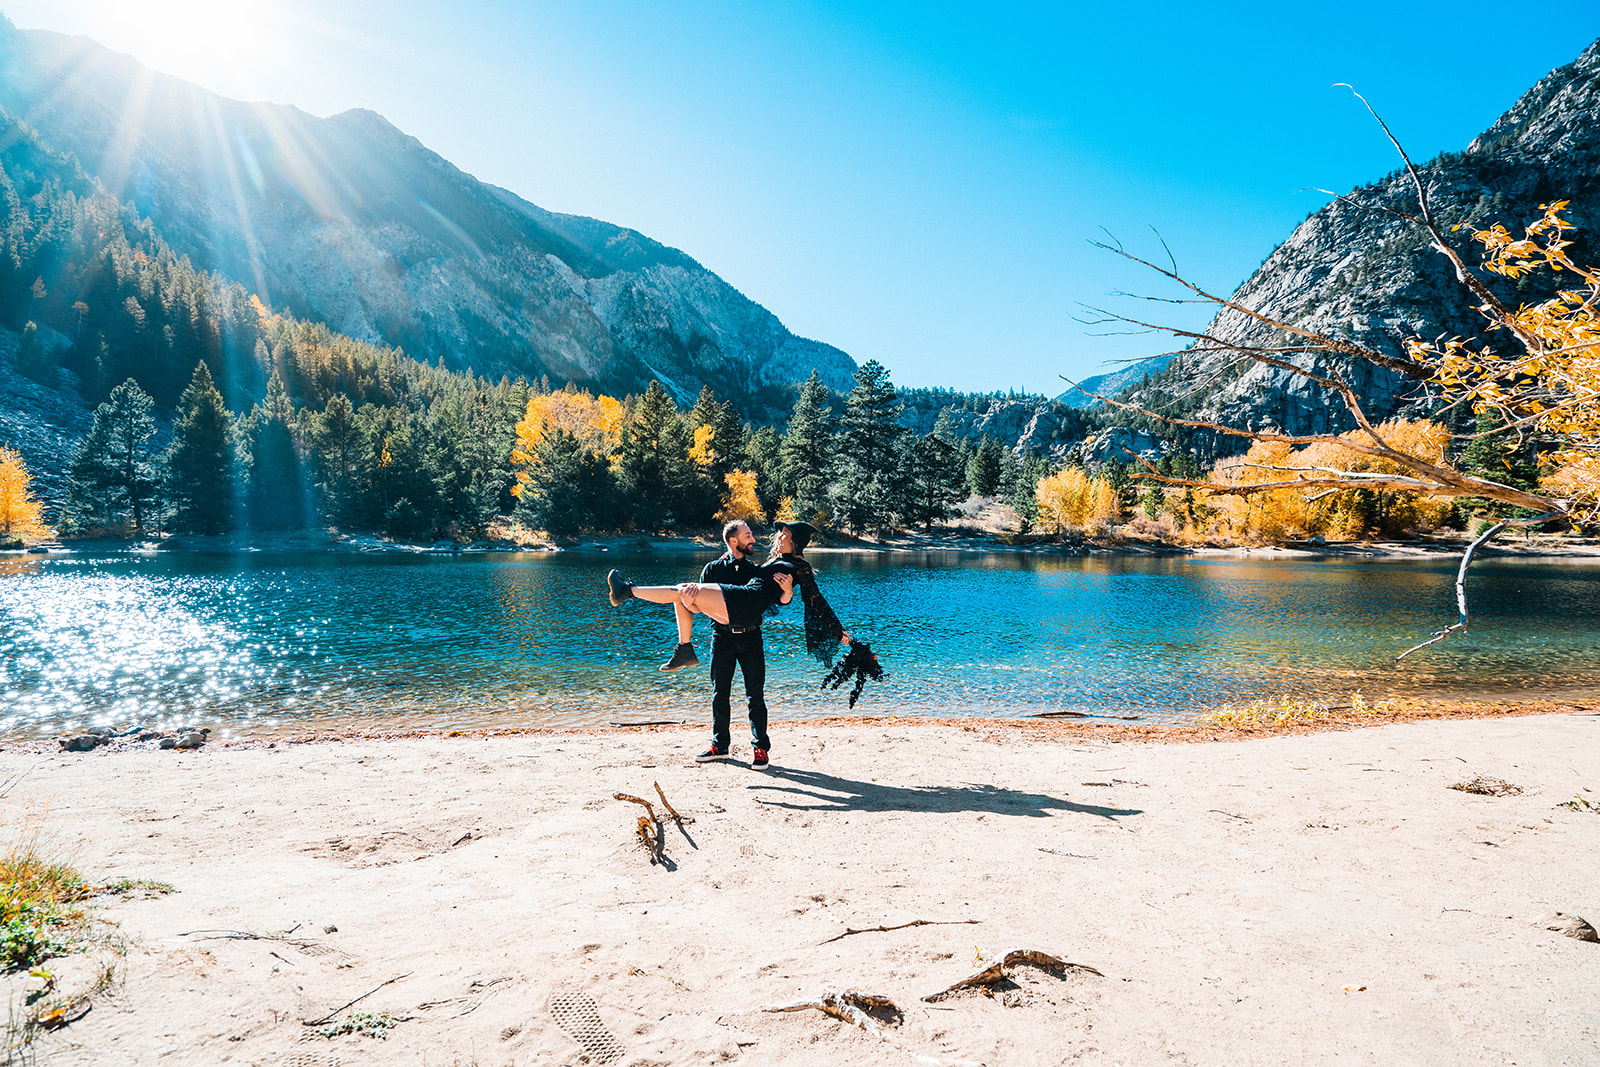 A groom in black attire holding his bride in a black elopement dress on a sandy lakeshore, 
surrounded by autumn trees and mountains under a clear blue sky during their Buena Vista elopement.